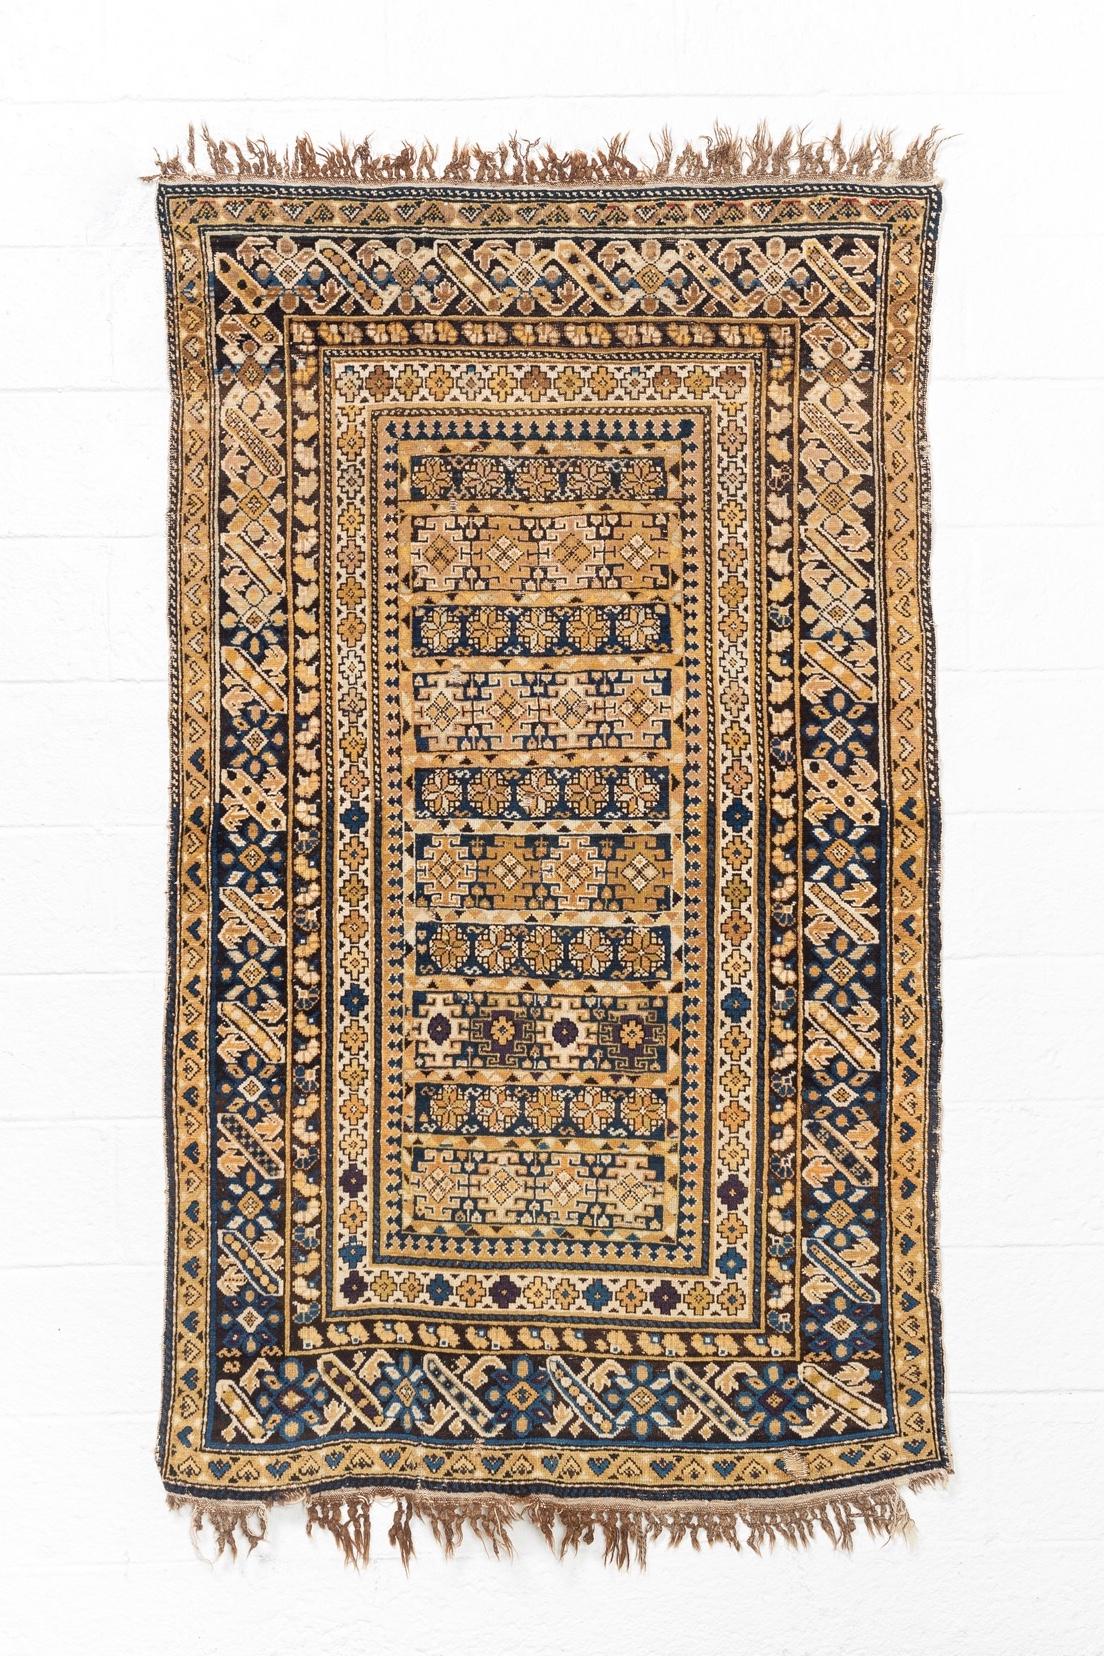 Other Antique Kuba Caucasian Tan and Blue Handmade Wool Floor Rug, Late 1800s For Sale